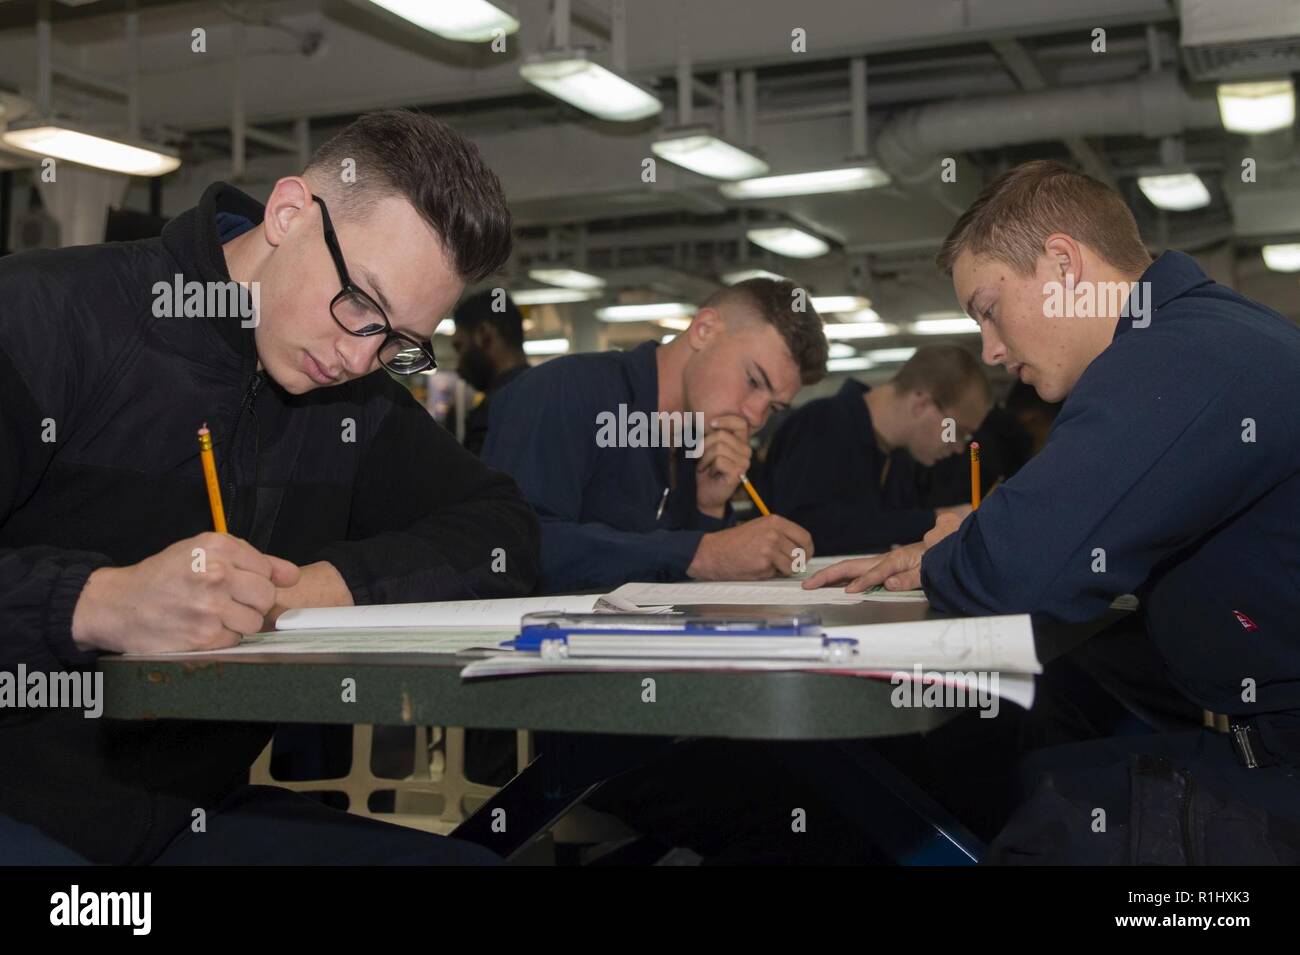 SAN DIEGO (Sept. 20, 2018) Sailors, assigned to the amphibious assault ship USS Bonhomme Richard (LHD6), take the Navywide E-4 advancement exam on the ship’s mess deck. Bonhomme Richard is currently underway in the U.S. 3rd Fleet area of operations. Stock Photo